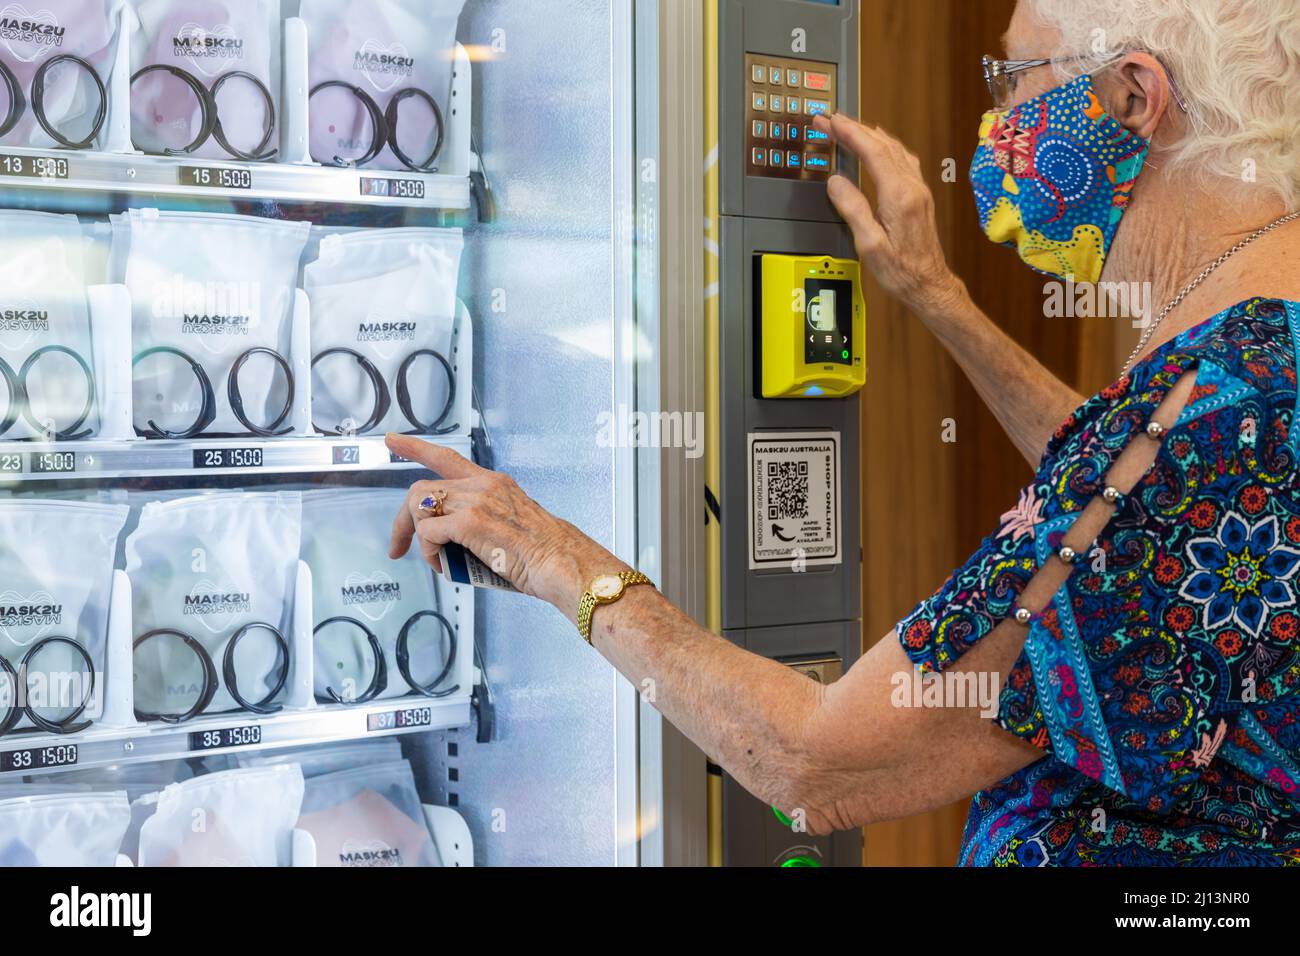 Elderly woman wearing mask purchasing a mask from vending machine to help prevent spread of coronavirus Stock Photo